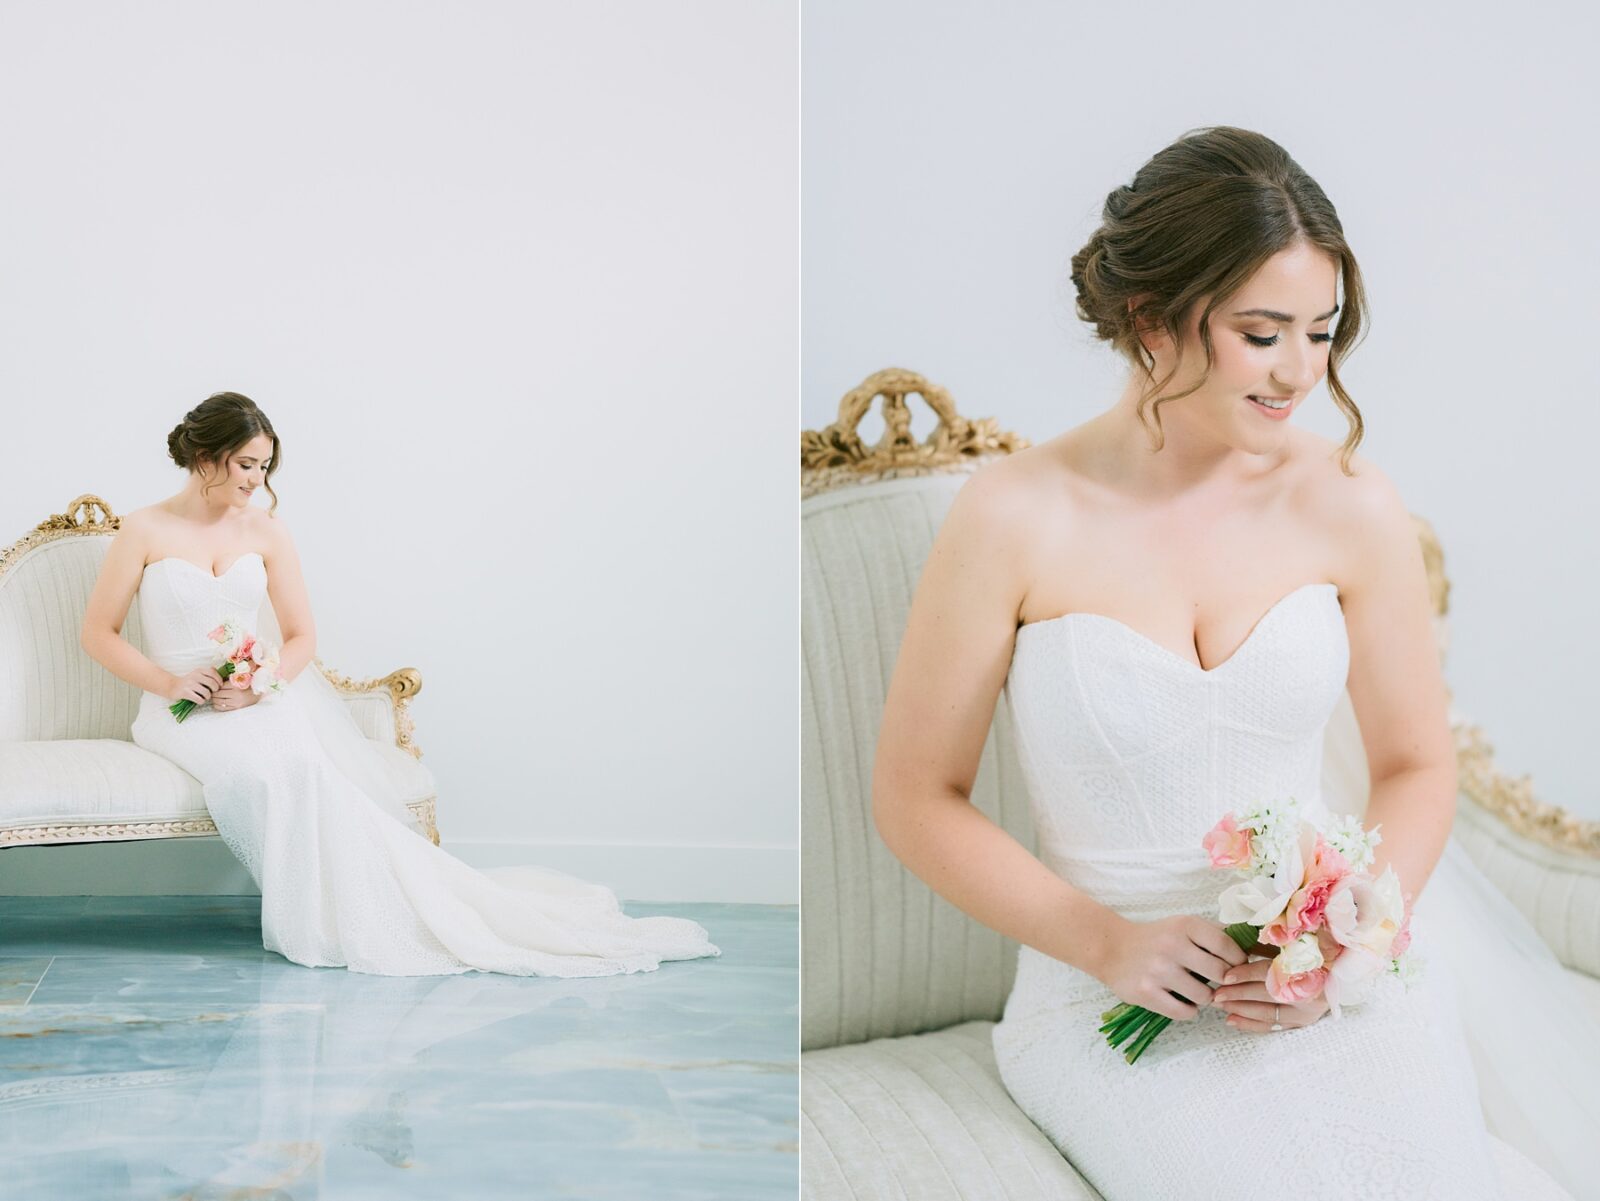 bridal suite at the videre estate, classic bridal look, bride sitting down, embroidered strapless wedding dress, bridal session, bride photography, the videre estate, hill country wedding venue, wimberley wedding venue, austin wedding photography, tara paige weddings, 